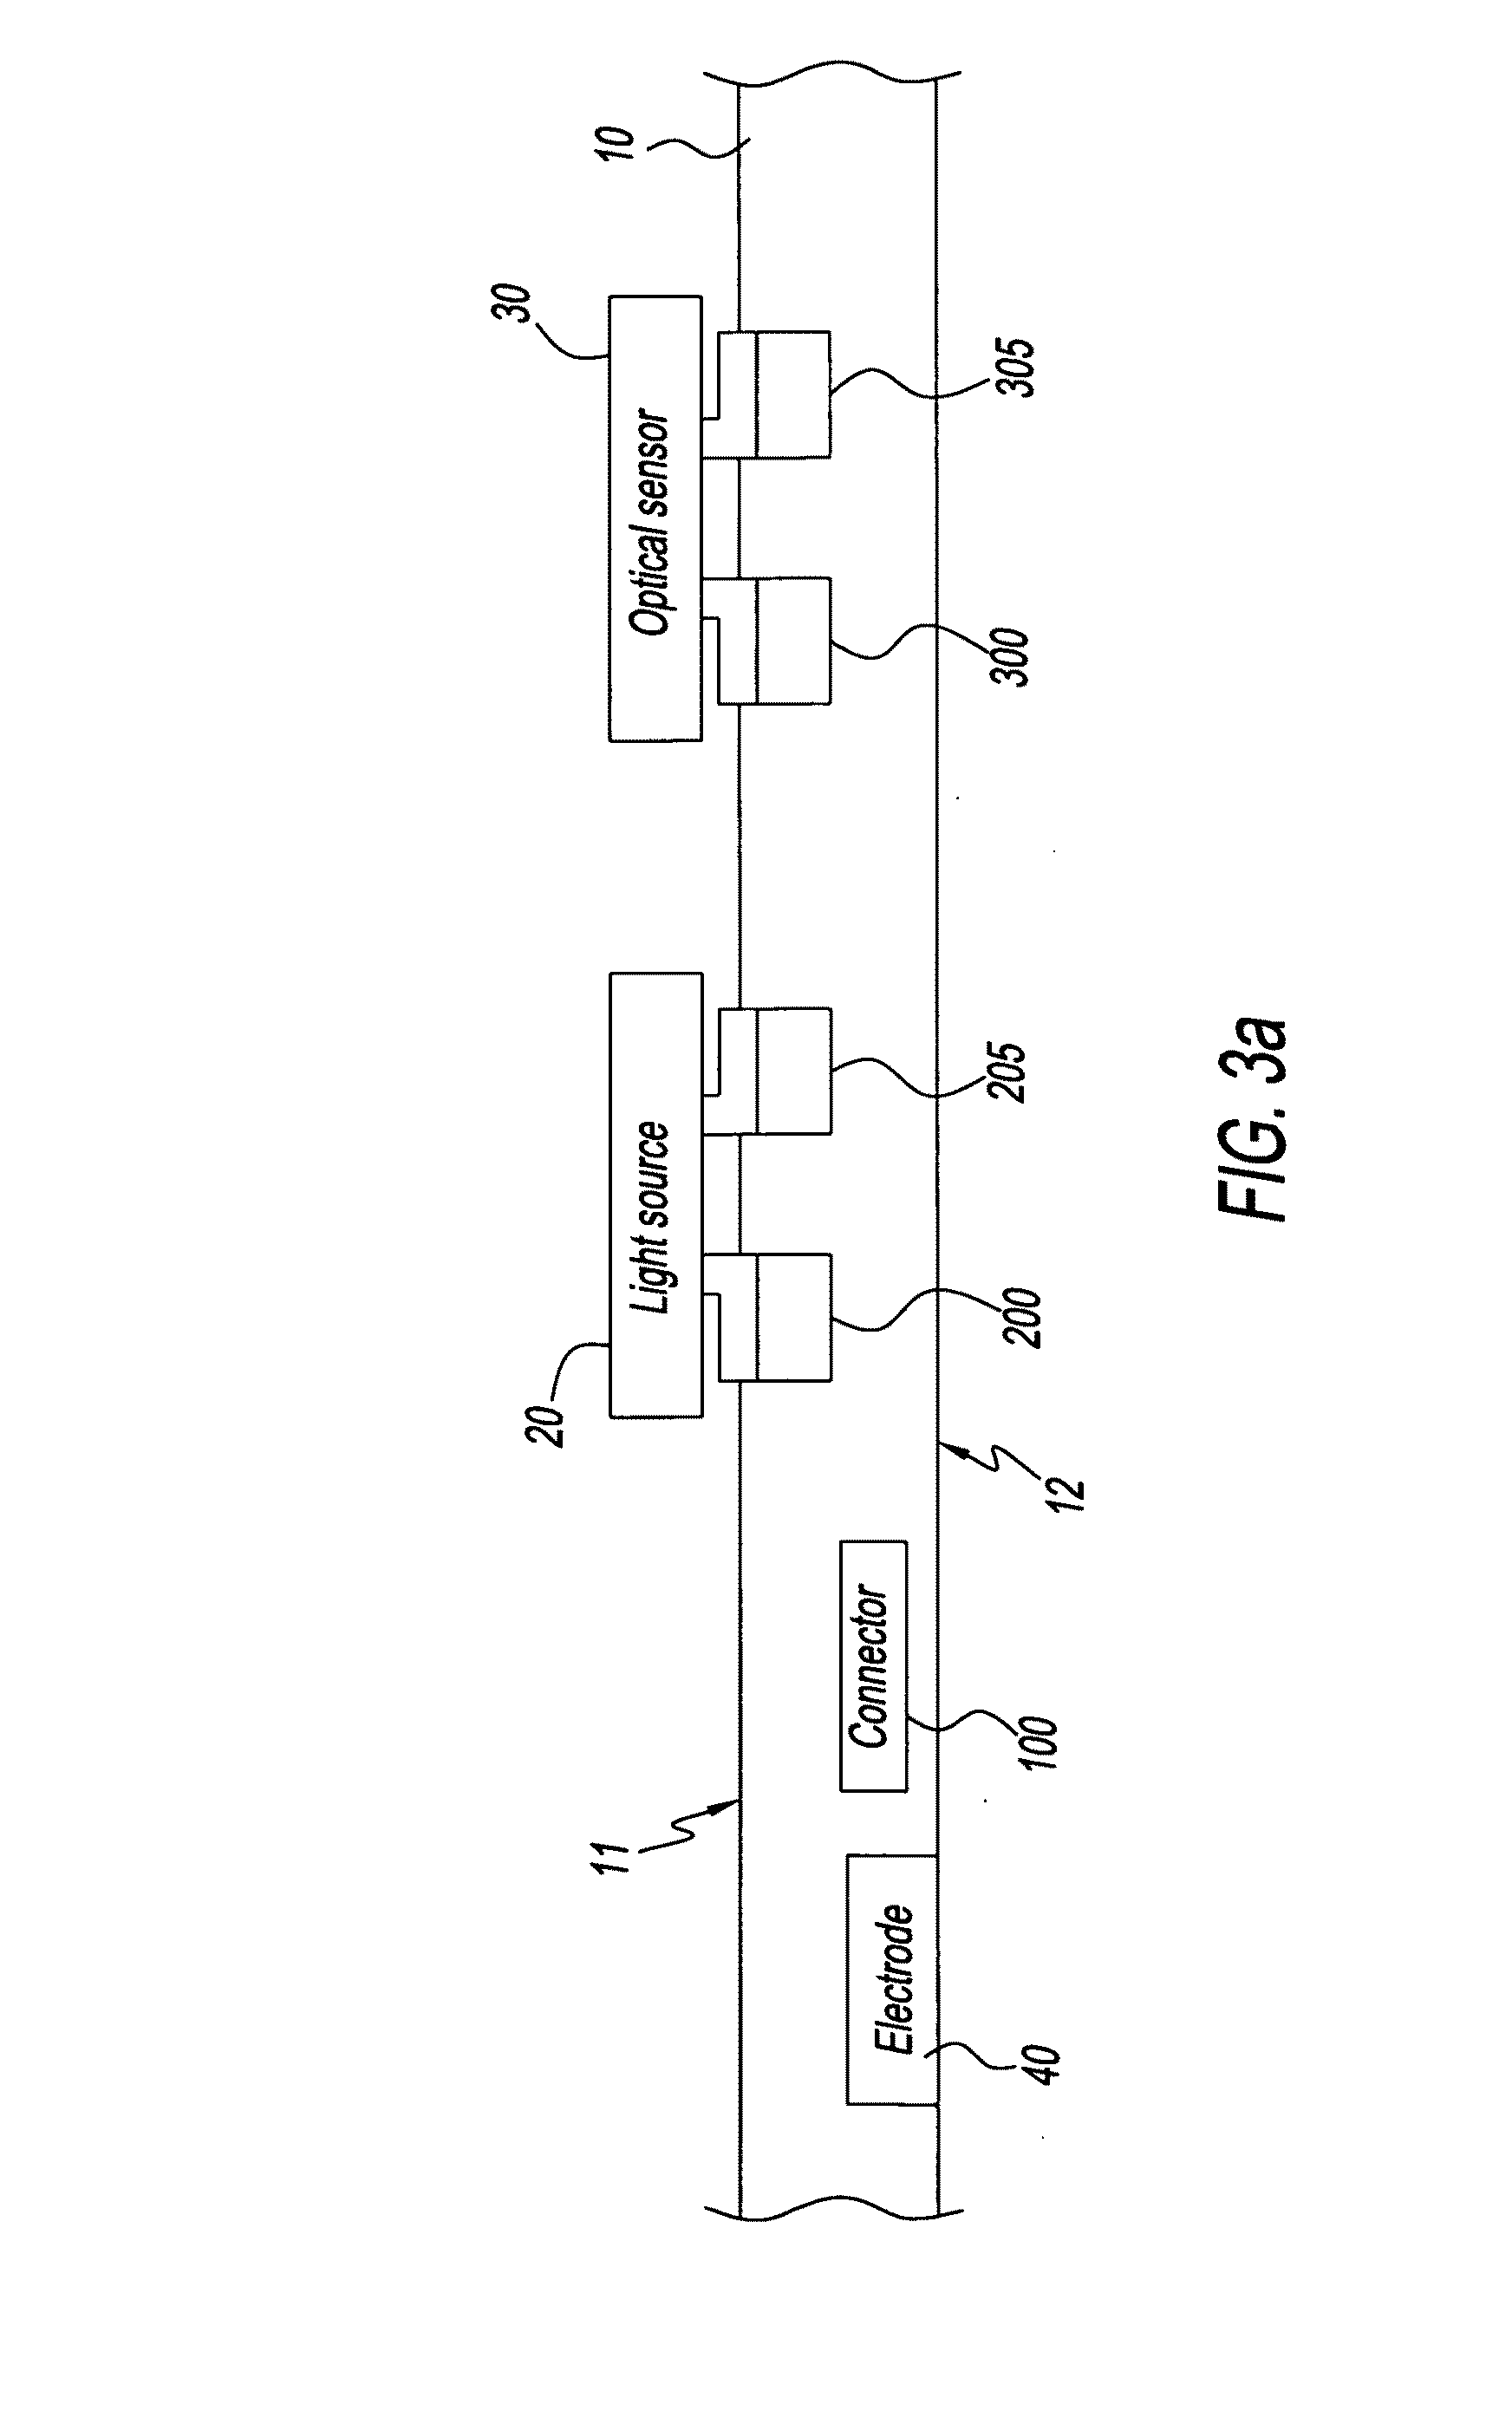 Apparatus for detecting brain conditions